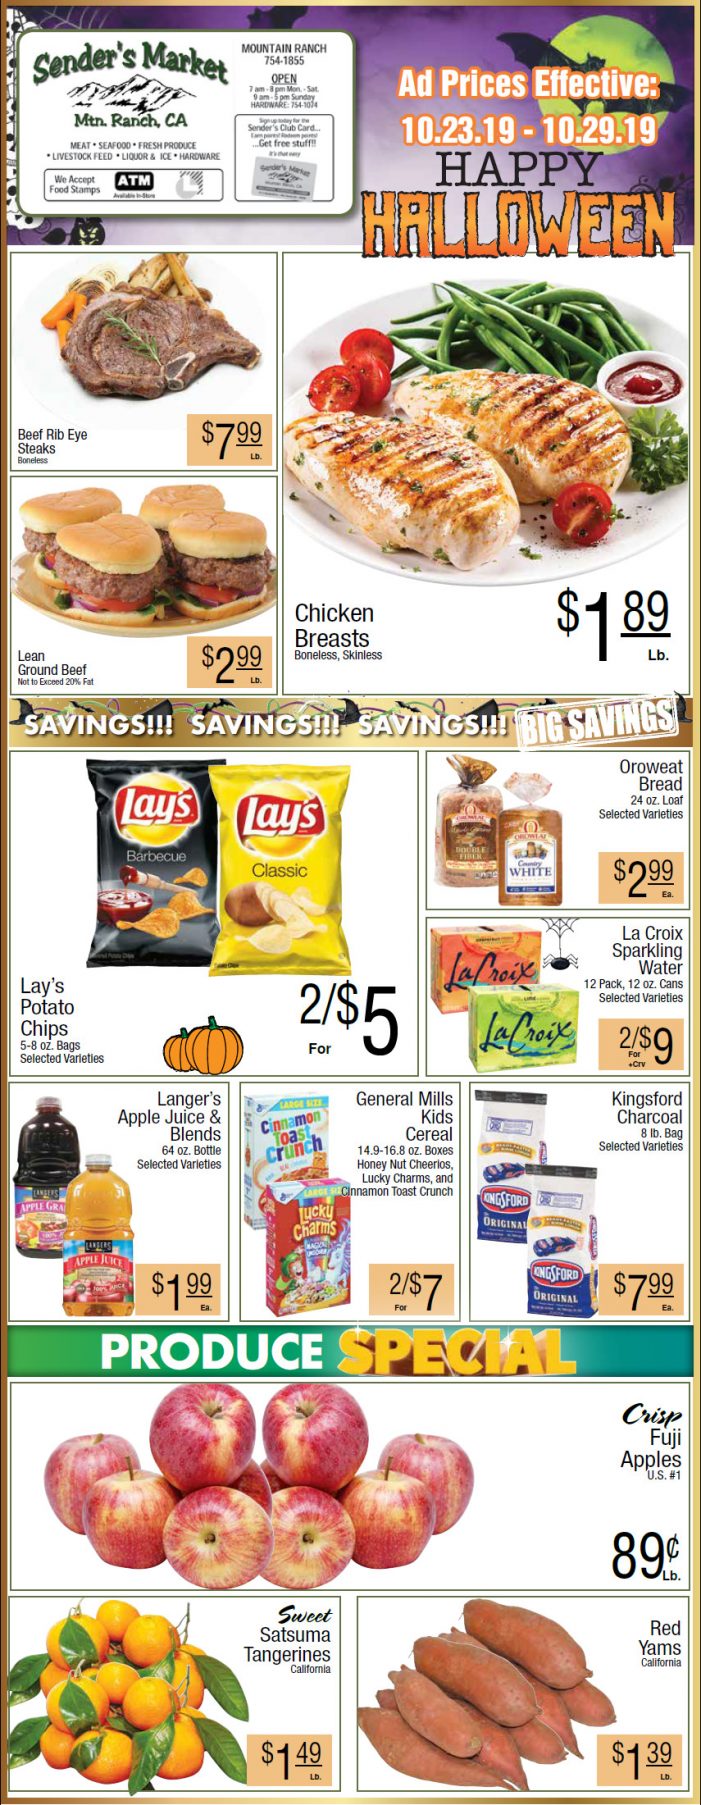 Sender’s Market Weekly Ad & Grocery Specials Through October 29th